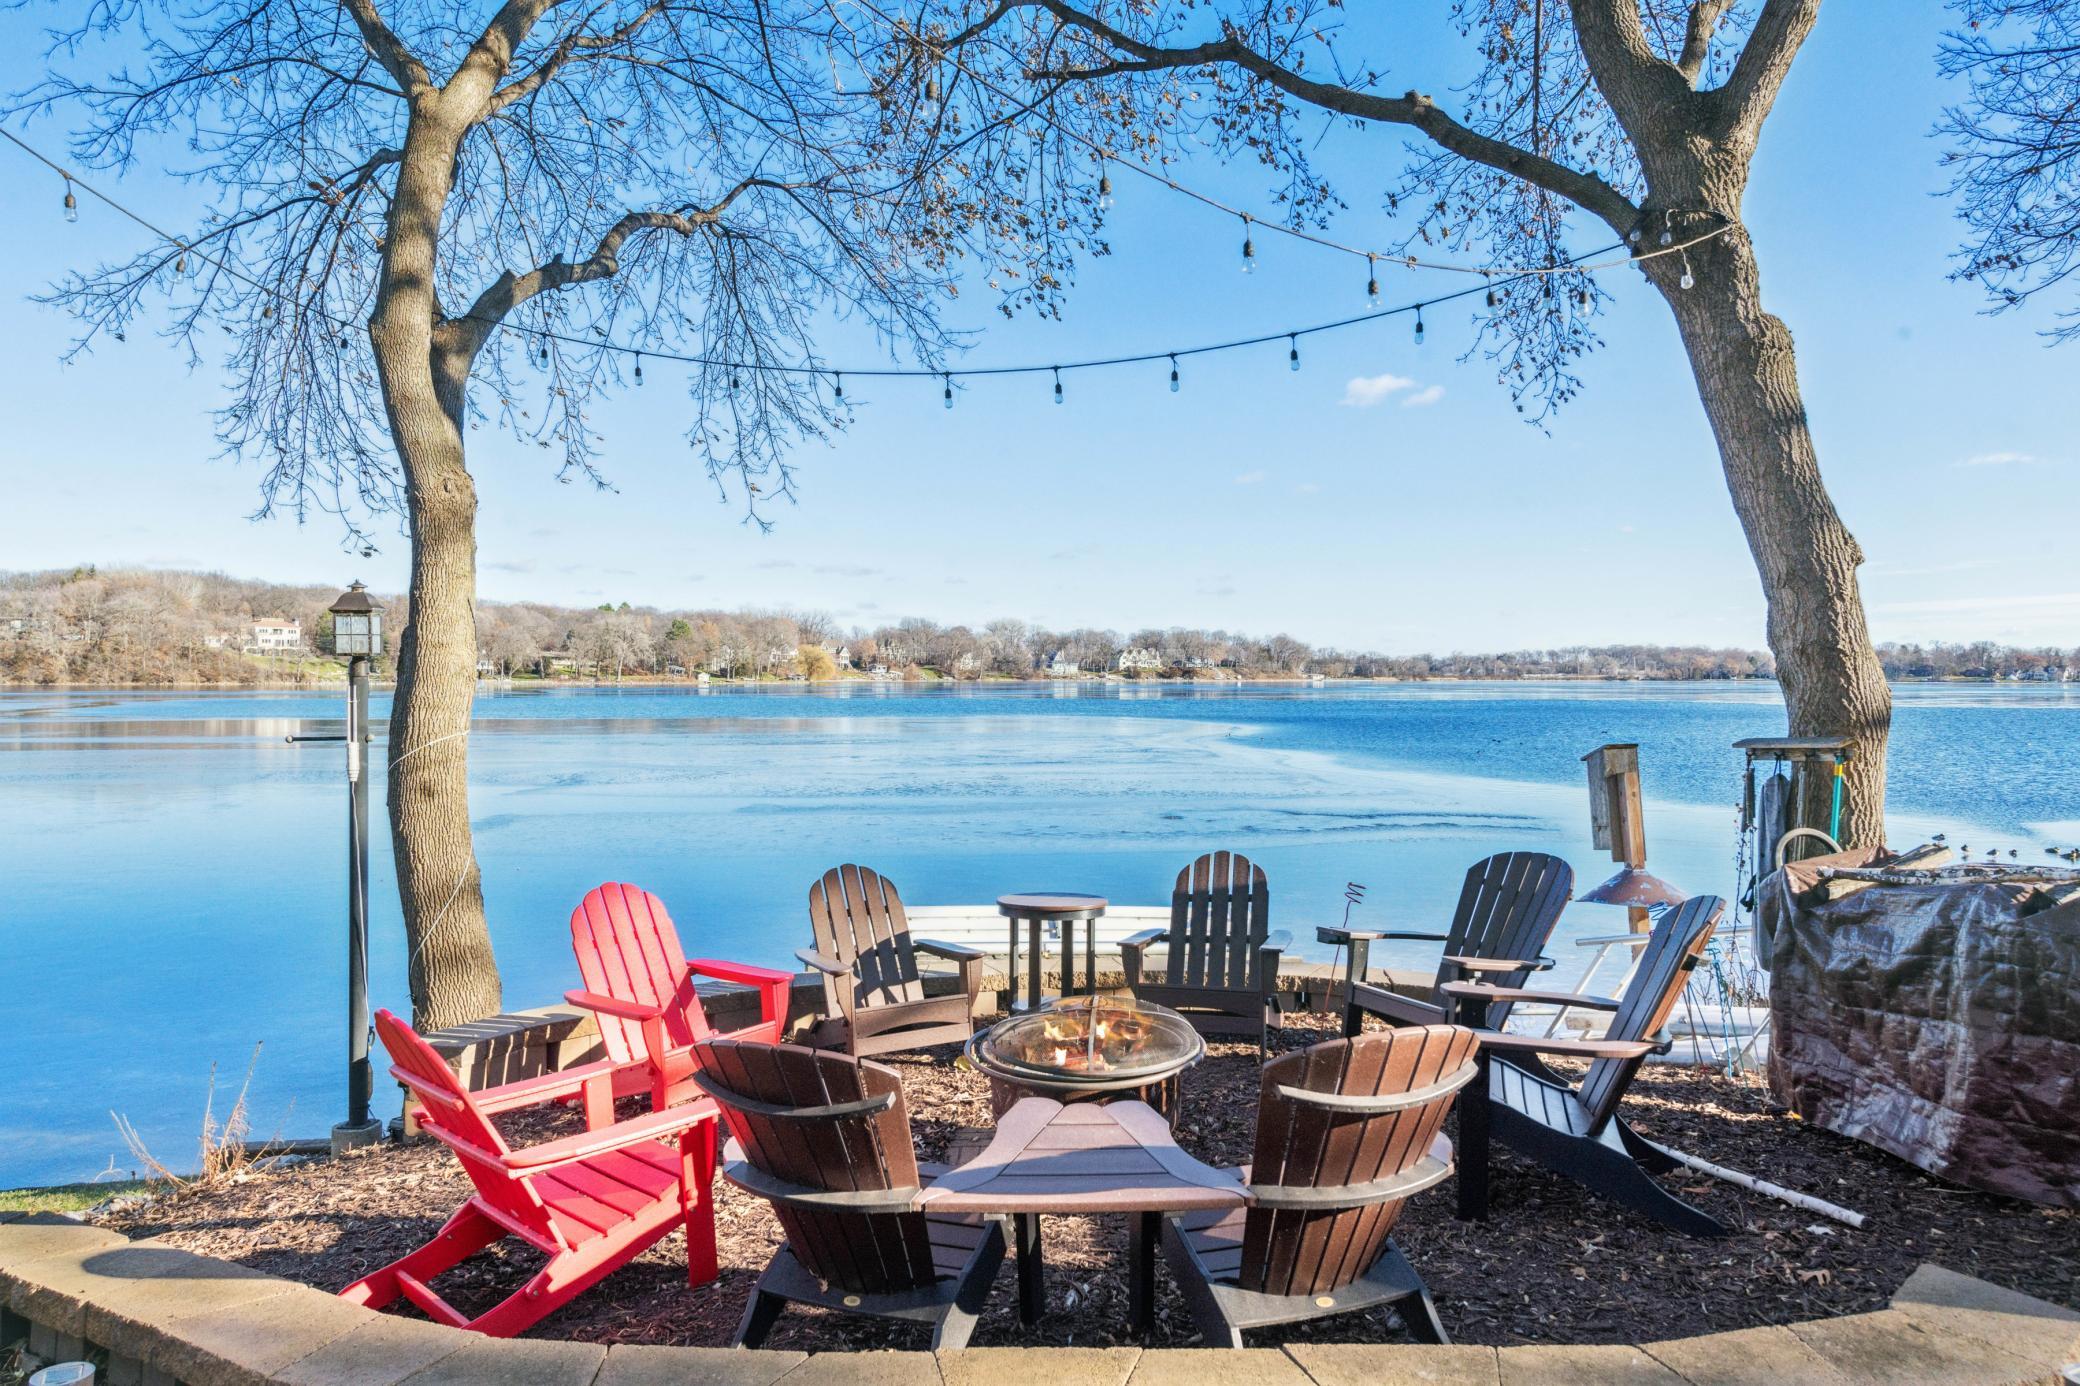 Are you ready for summer? Spectacular views of Lake Minnetonka!